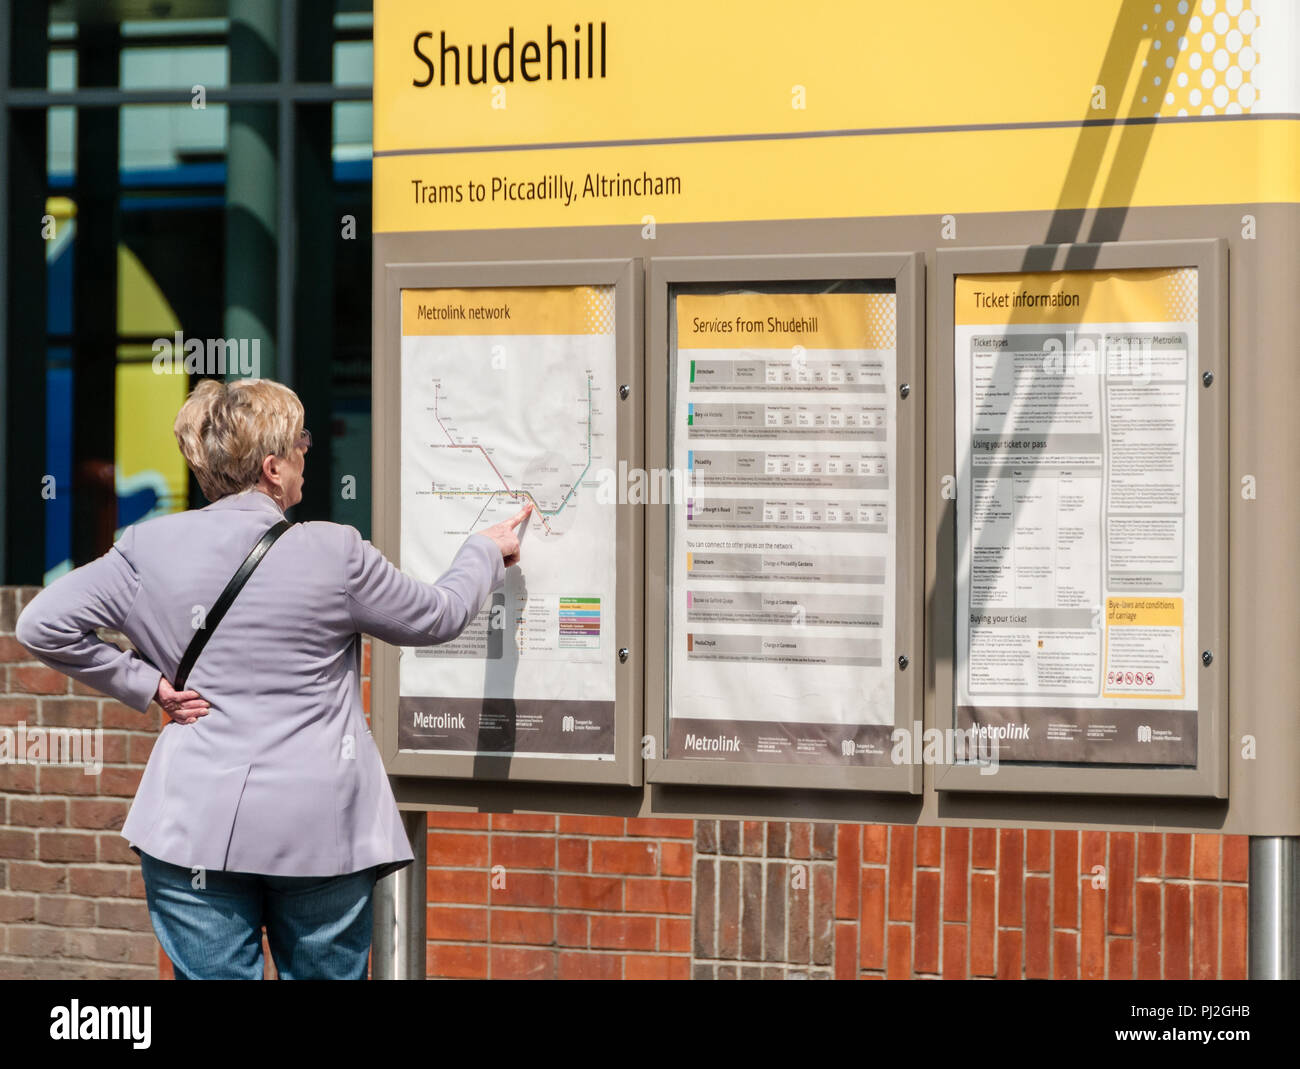 Middle-aged woman looking confused in planning journey on a Metrolink tram at Shudehill in Manchester Stock Photo